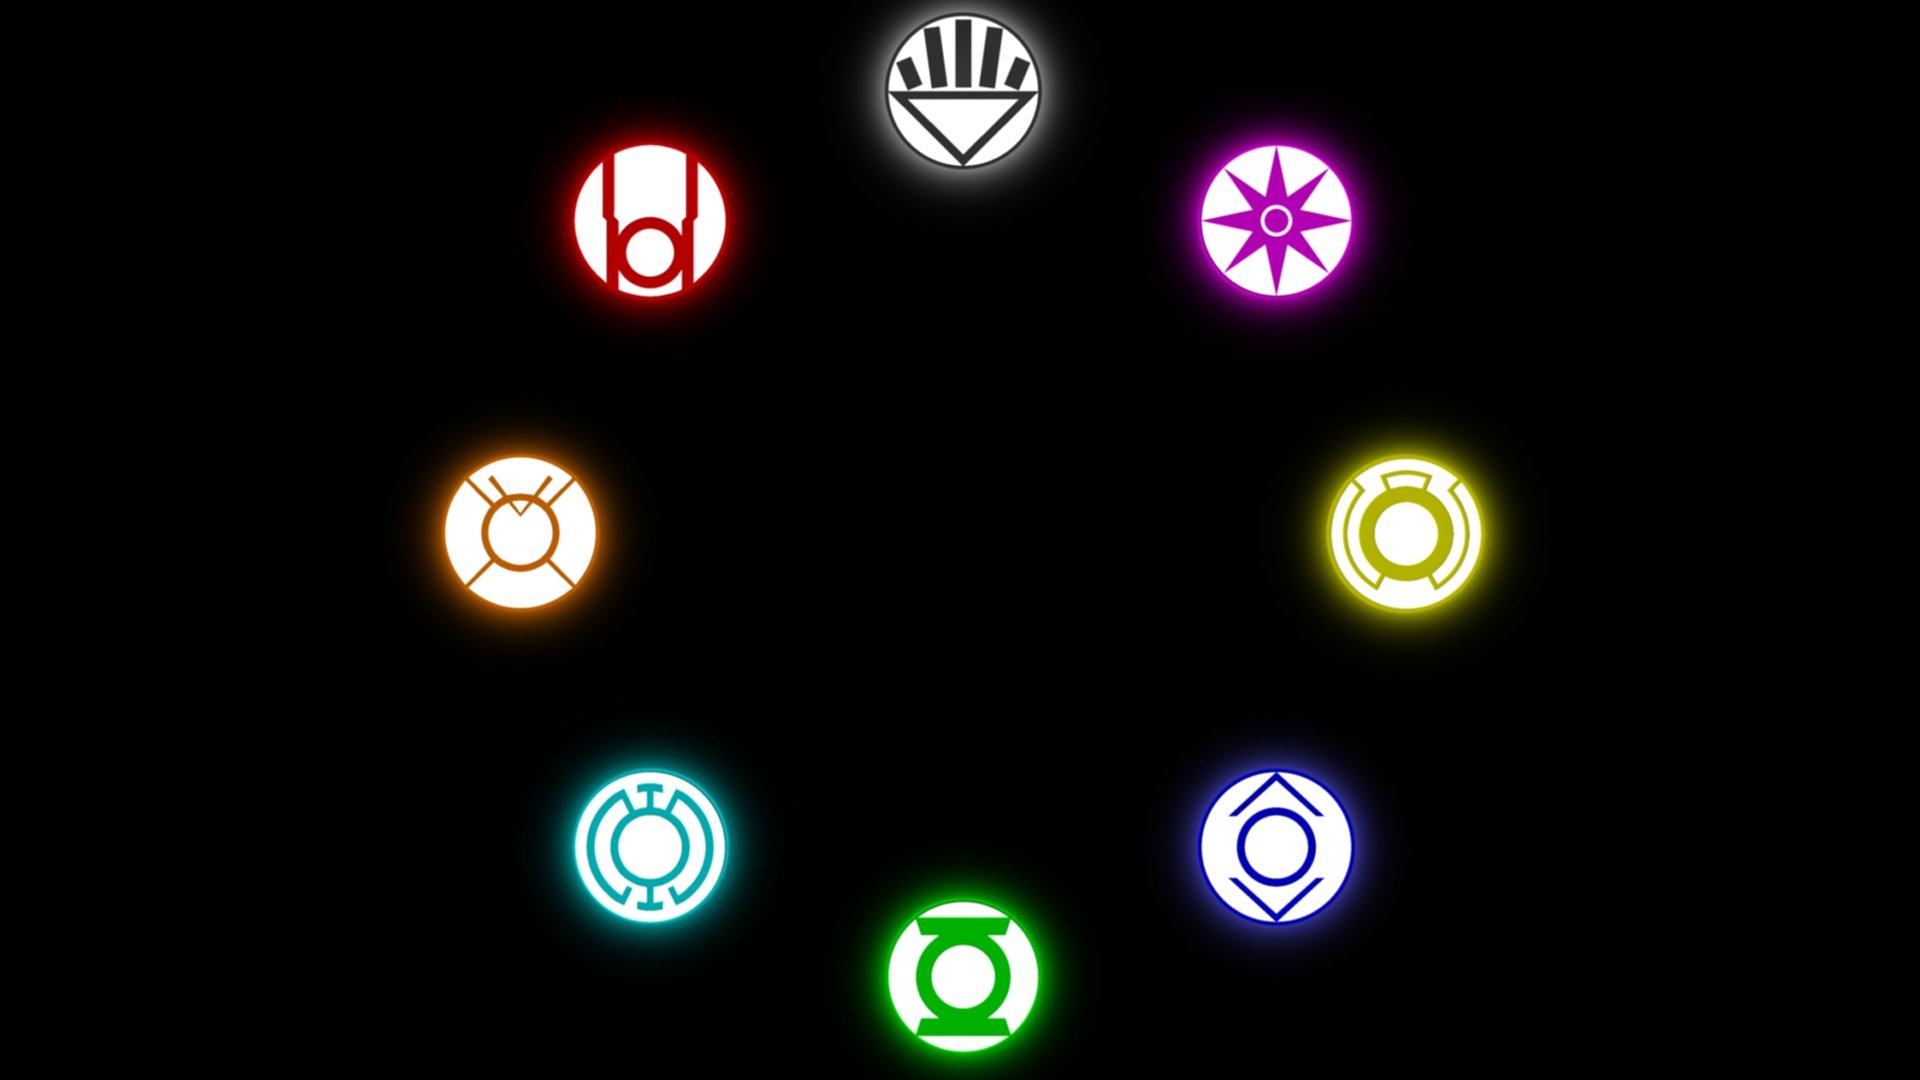 Download 1080p Lantern Corps computer wallpaper ID:189500 for free